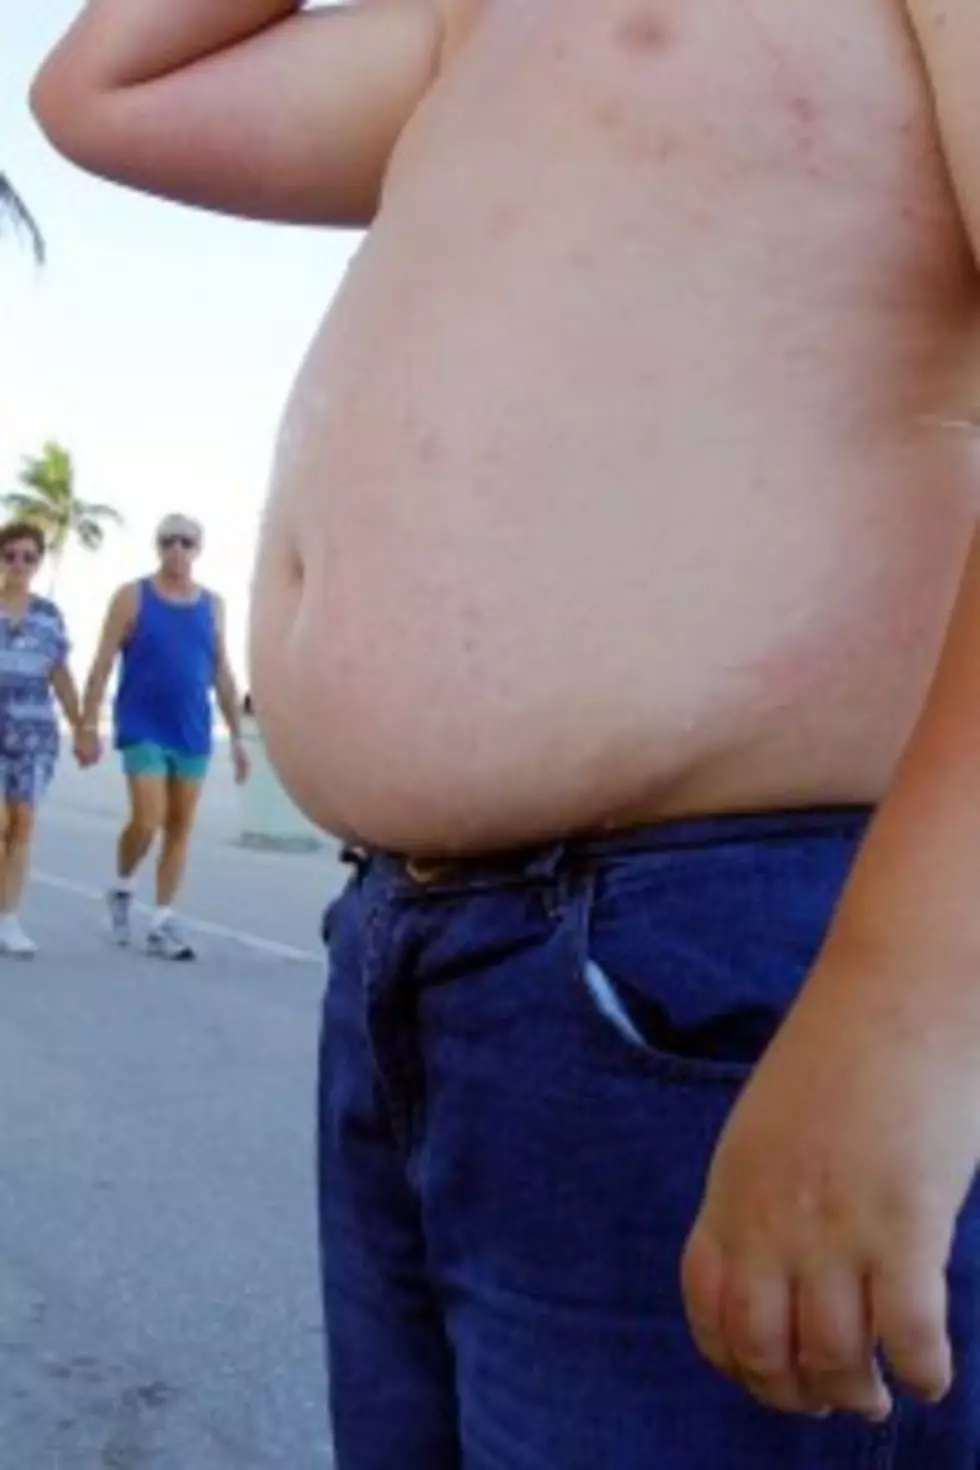 12 States Have Very High Obesity Rates [AUDIO]